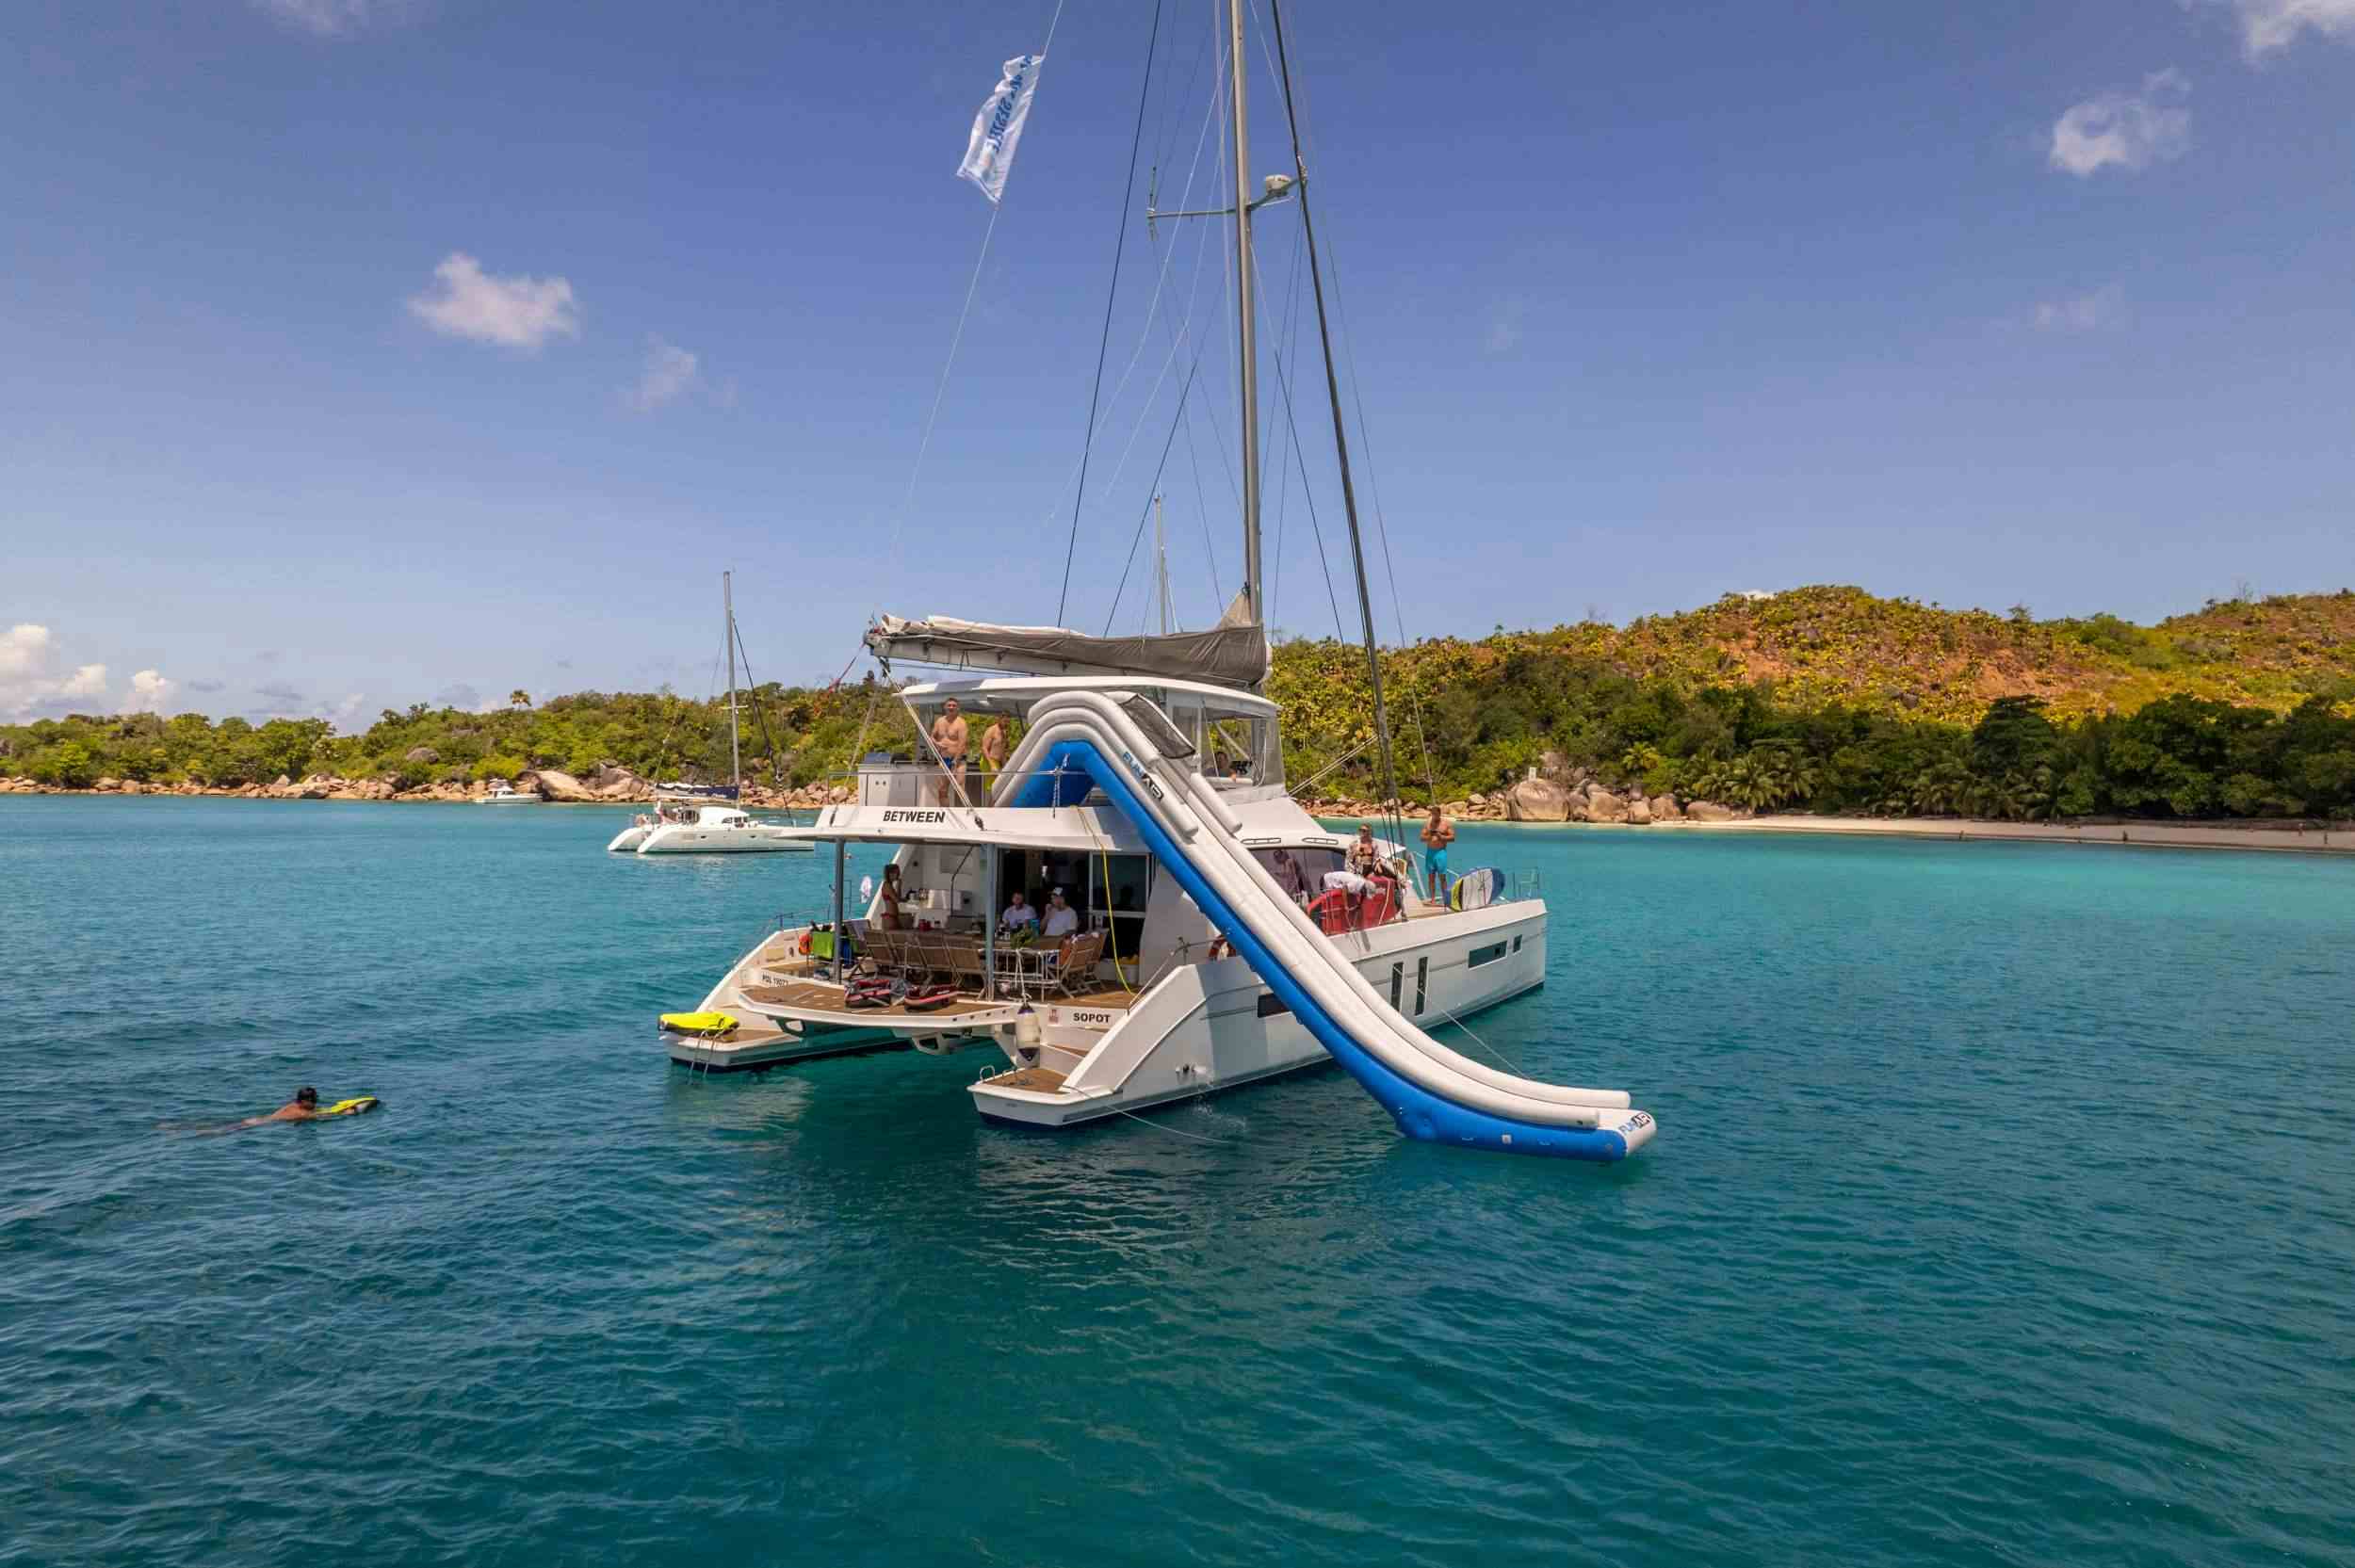 BETWEEN - Yacht Charter Phuket & Boat hire in Indian Ocean & SE Asia 1